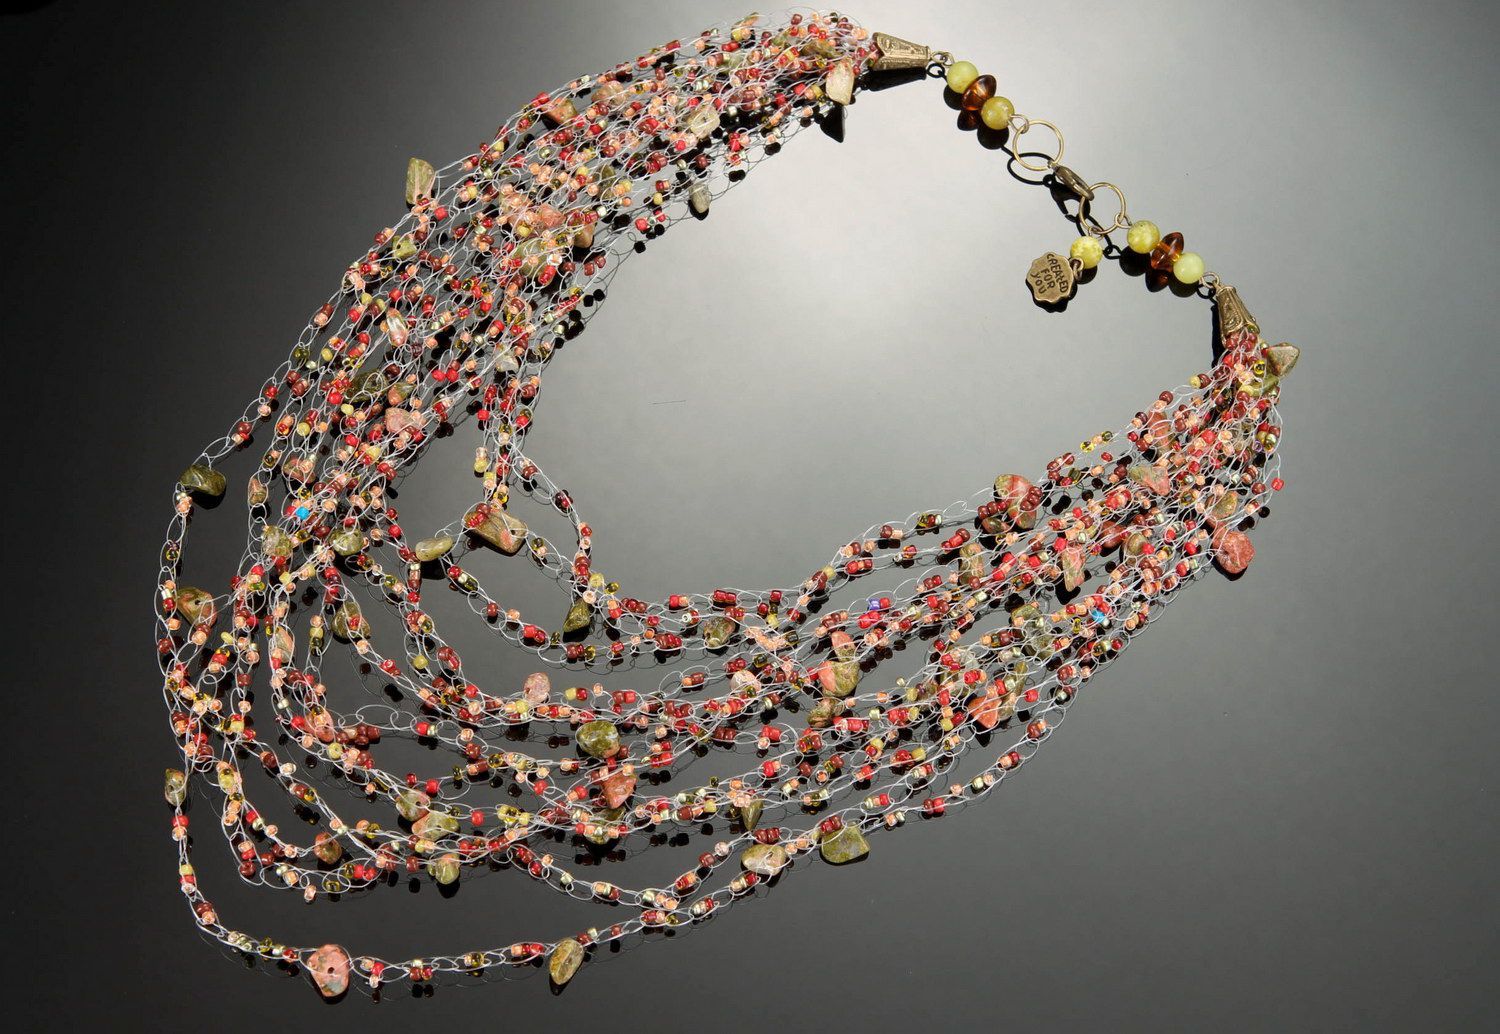 Airpuff-necklace made of beads photo 1